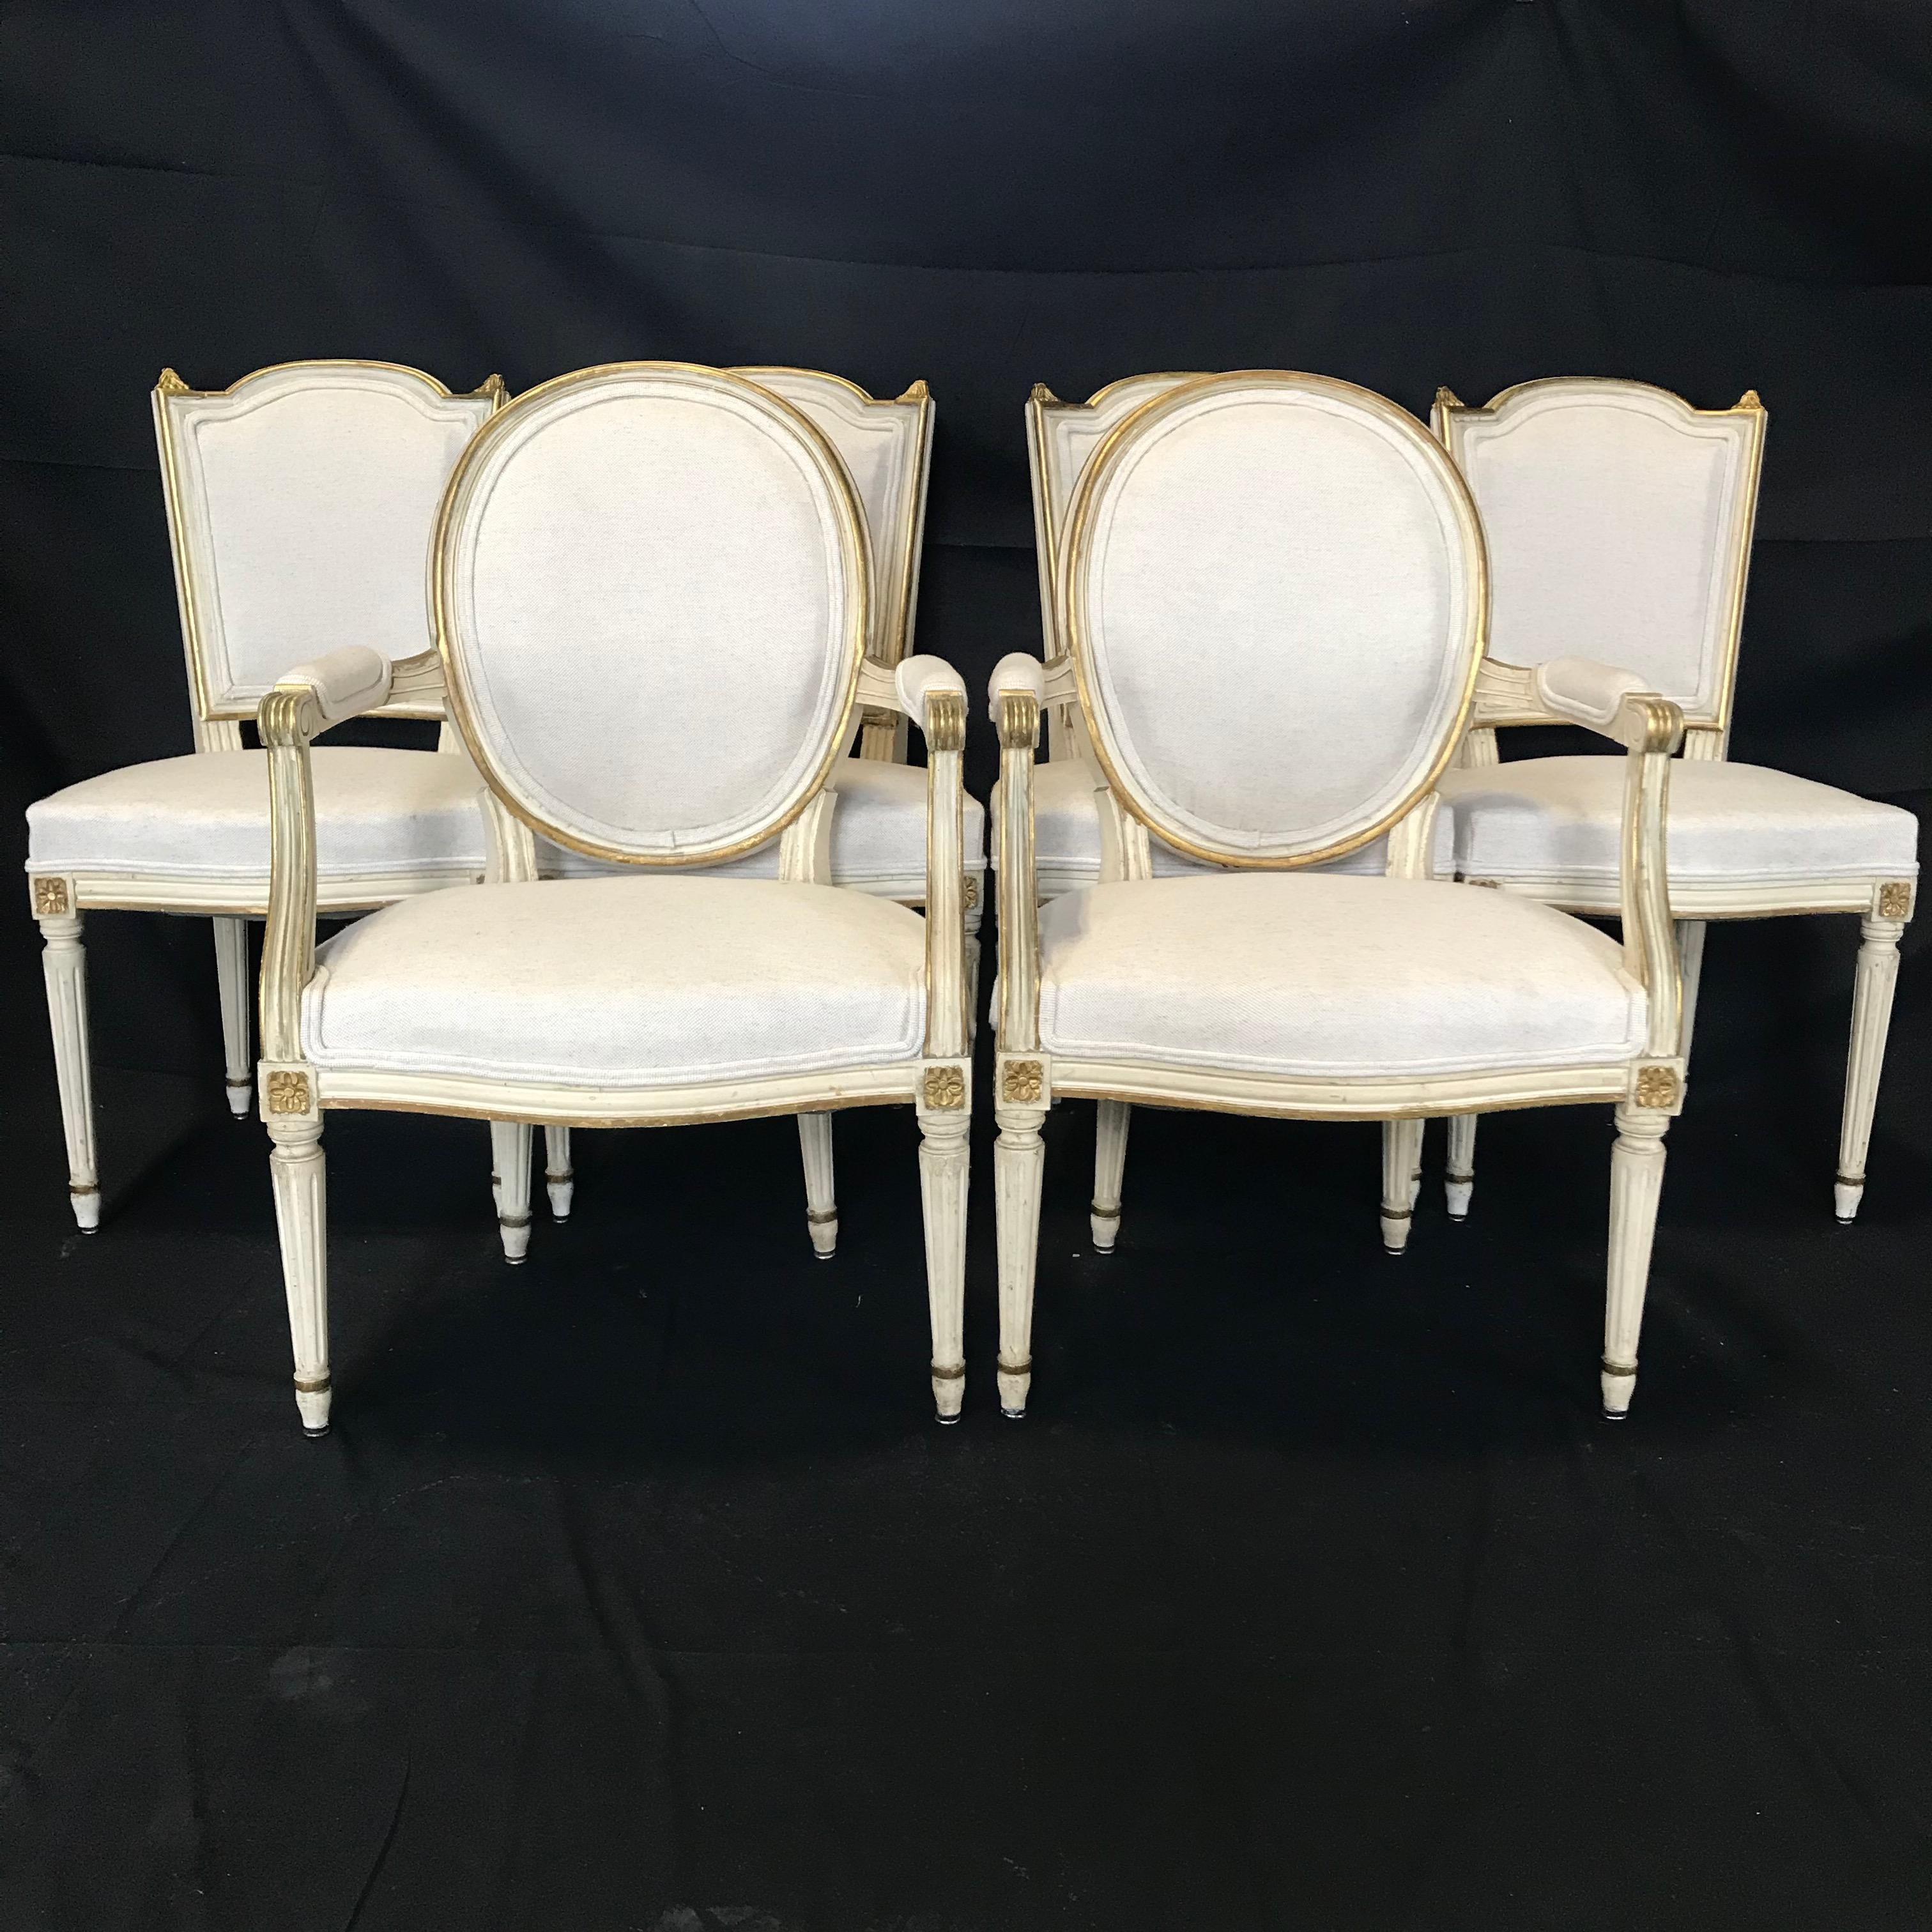 French Set of Six Antique Painted Louis XVI Gustavian Style Dining Chairs